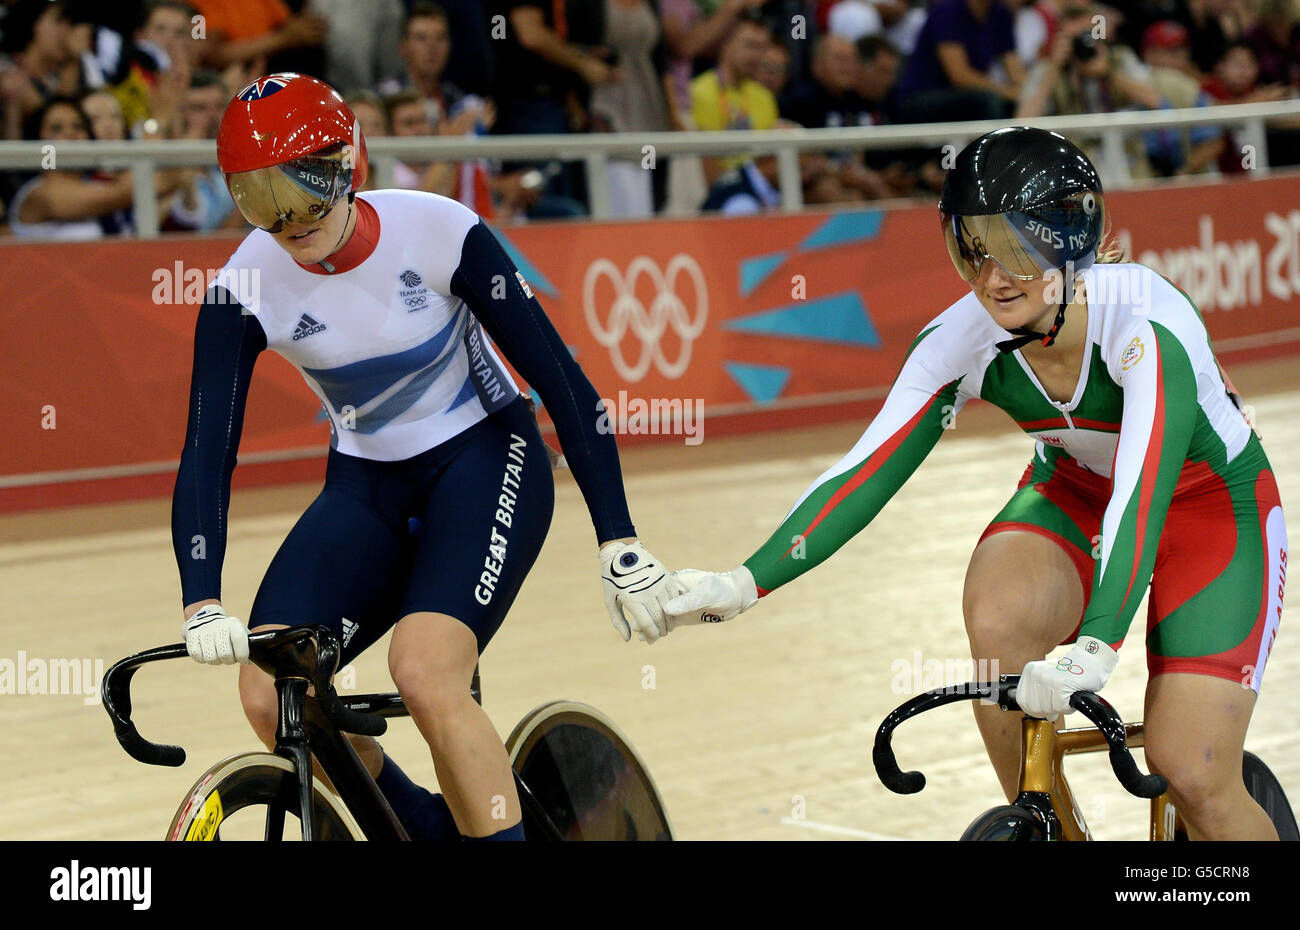 Great Britain's Victoria Pendleton after winning her Women's Sprint Quarter Final with Belarus's Olga Panarina (right) on day Ten of the Olympic Games at the Velodrome in London. Stock Photo